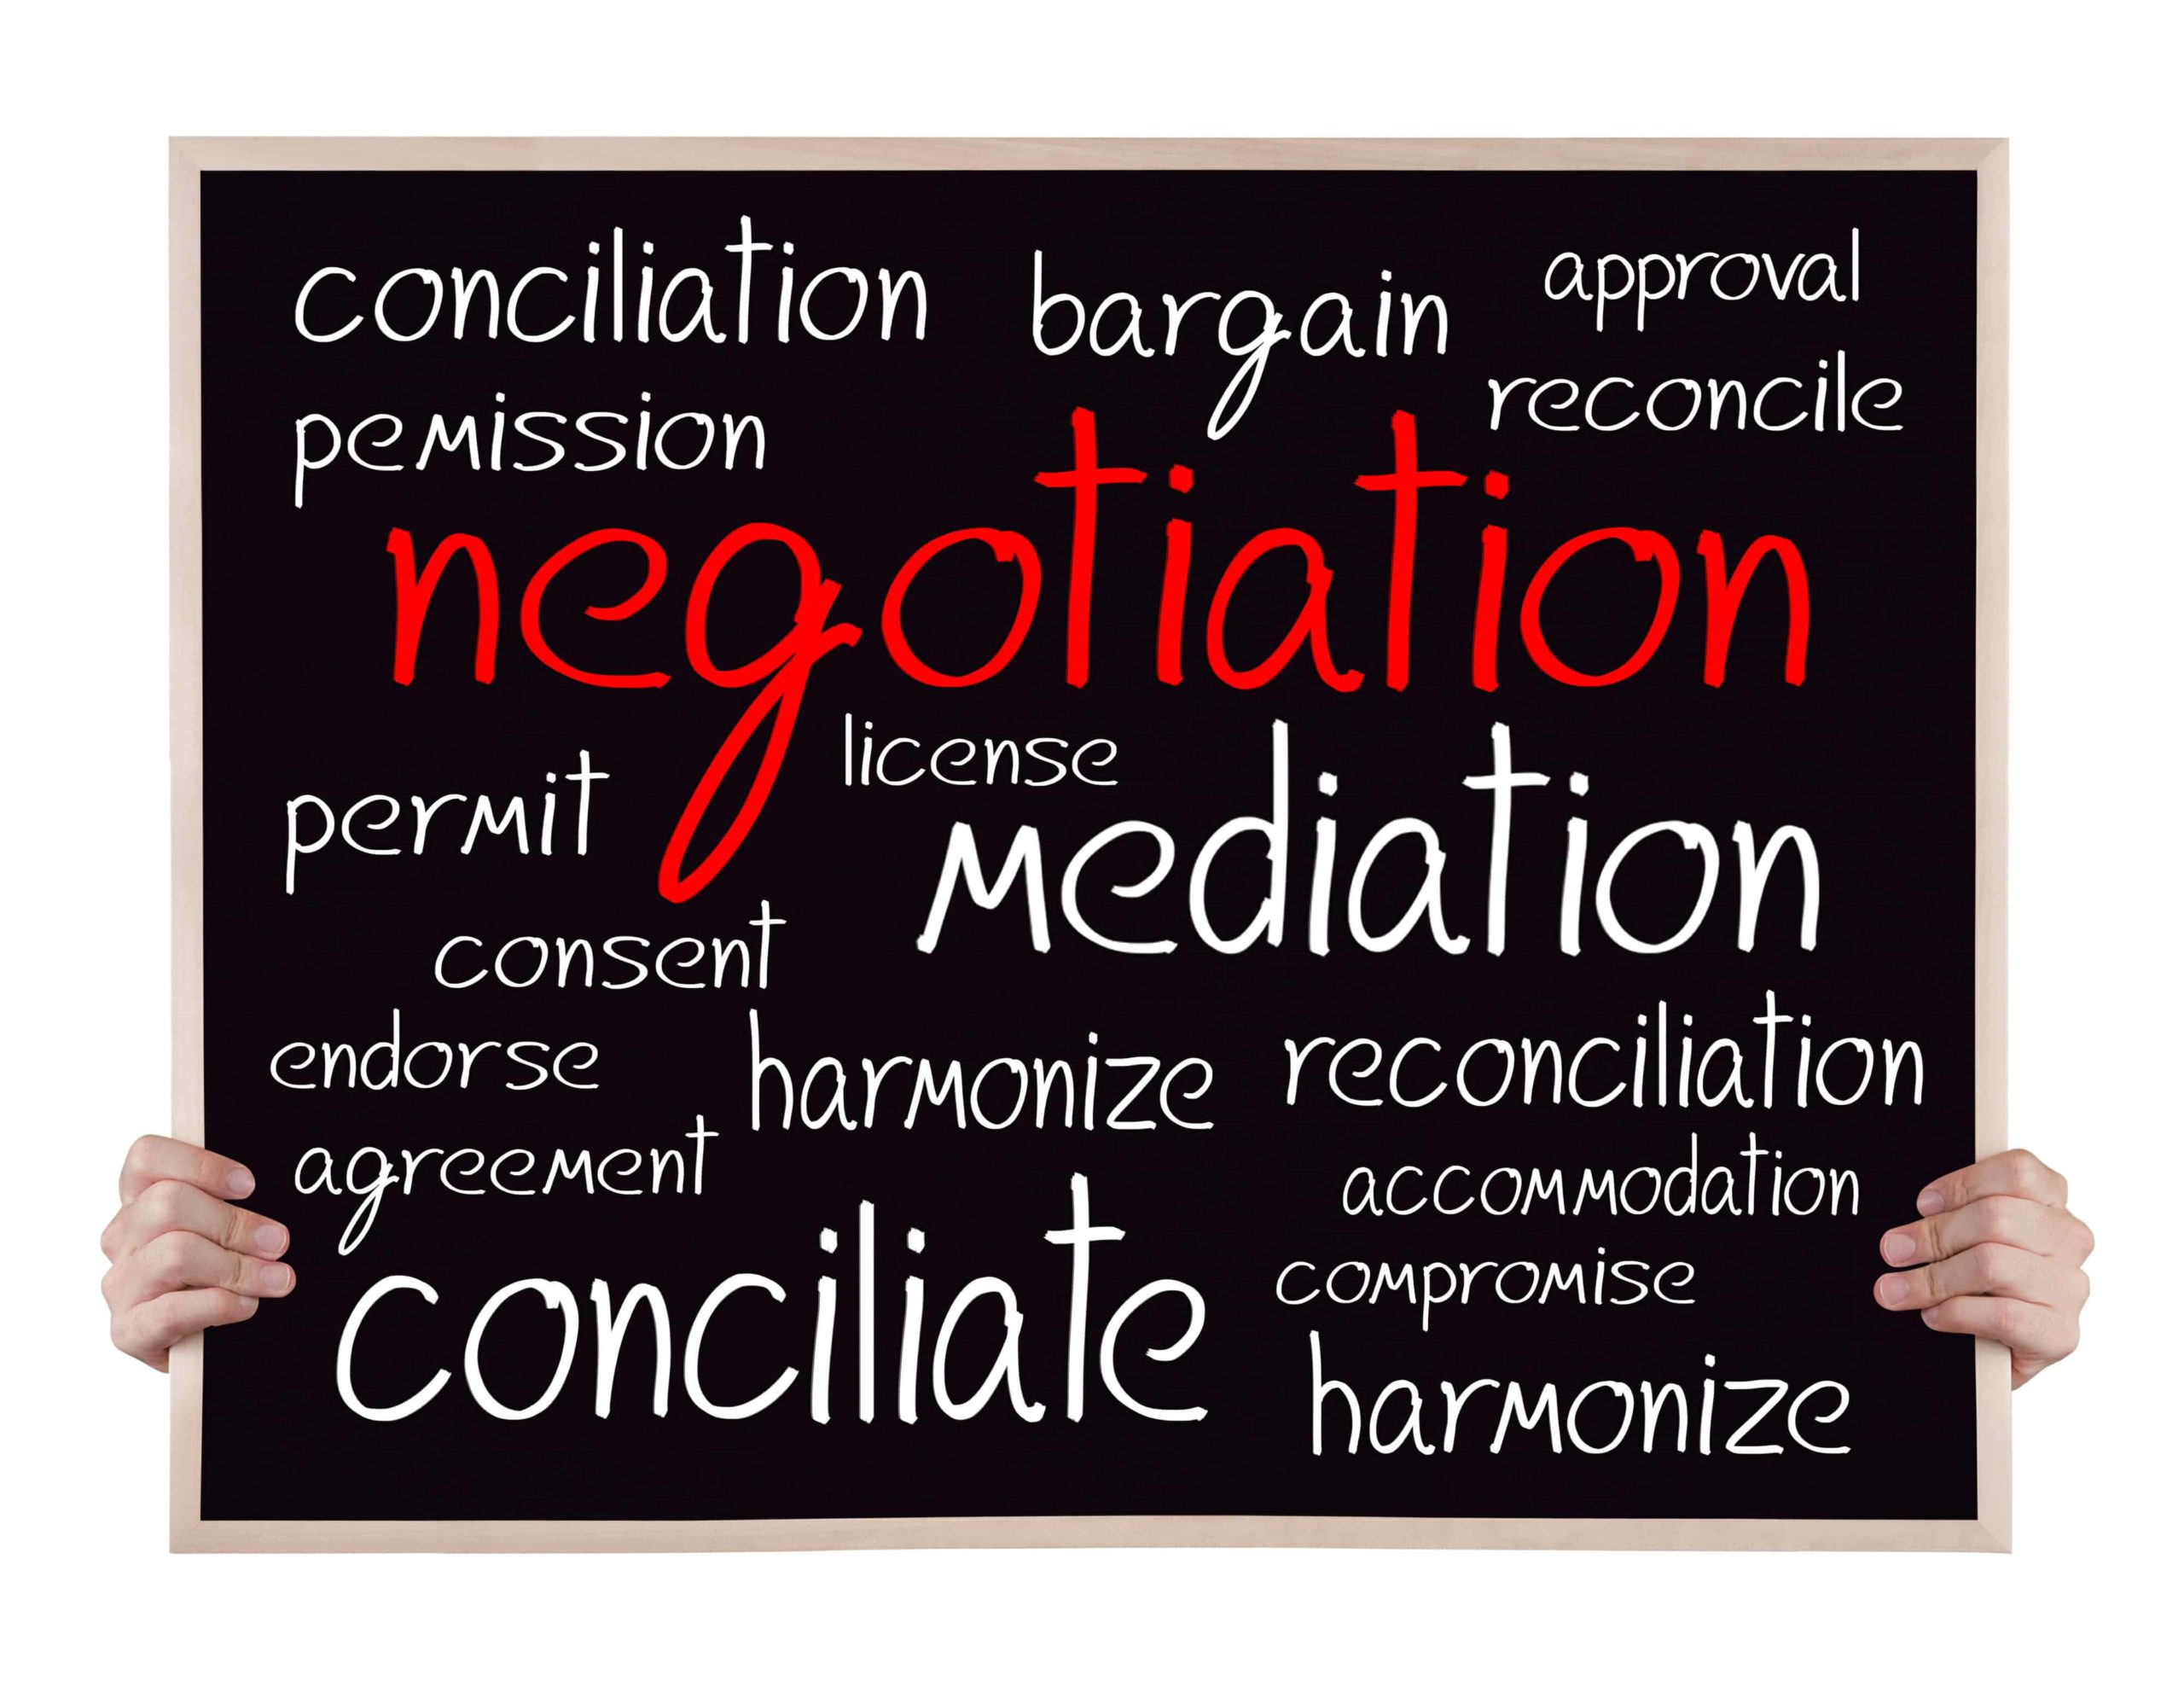 Word negotiation in red on a chalkboard, with mediation, permit, reconcile and other such words in chalk.